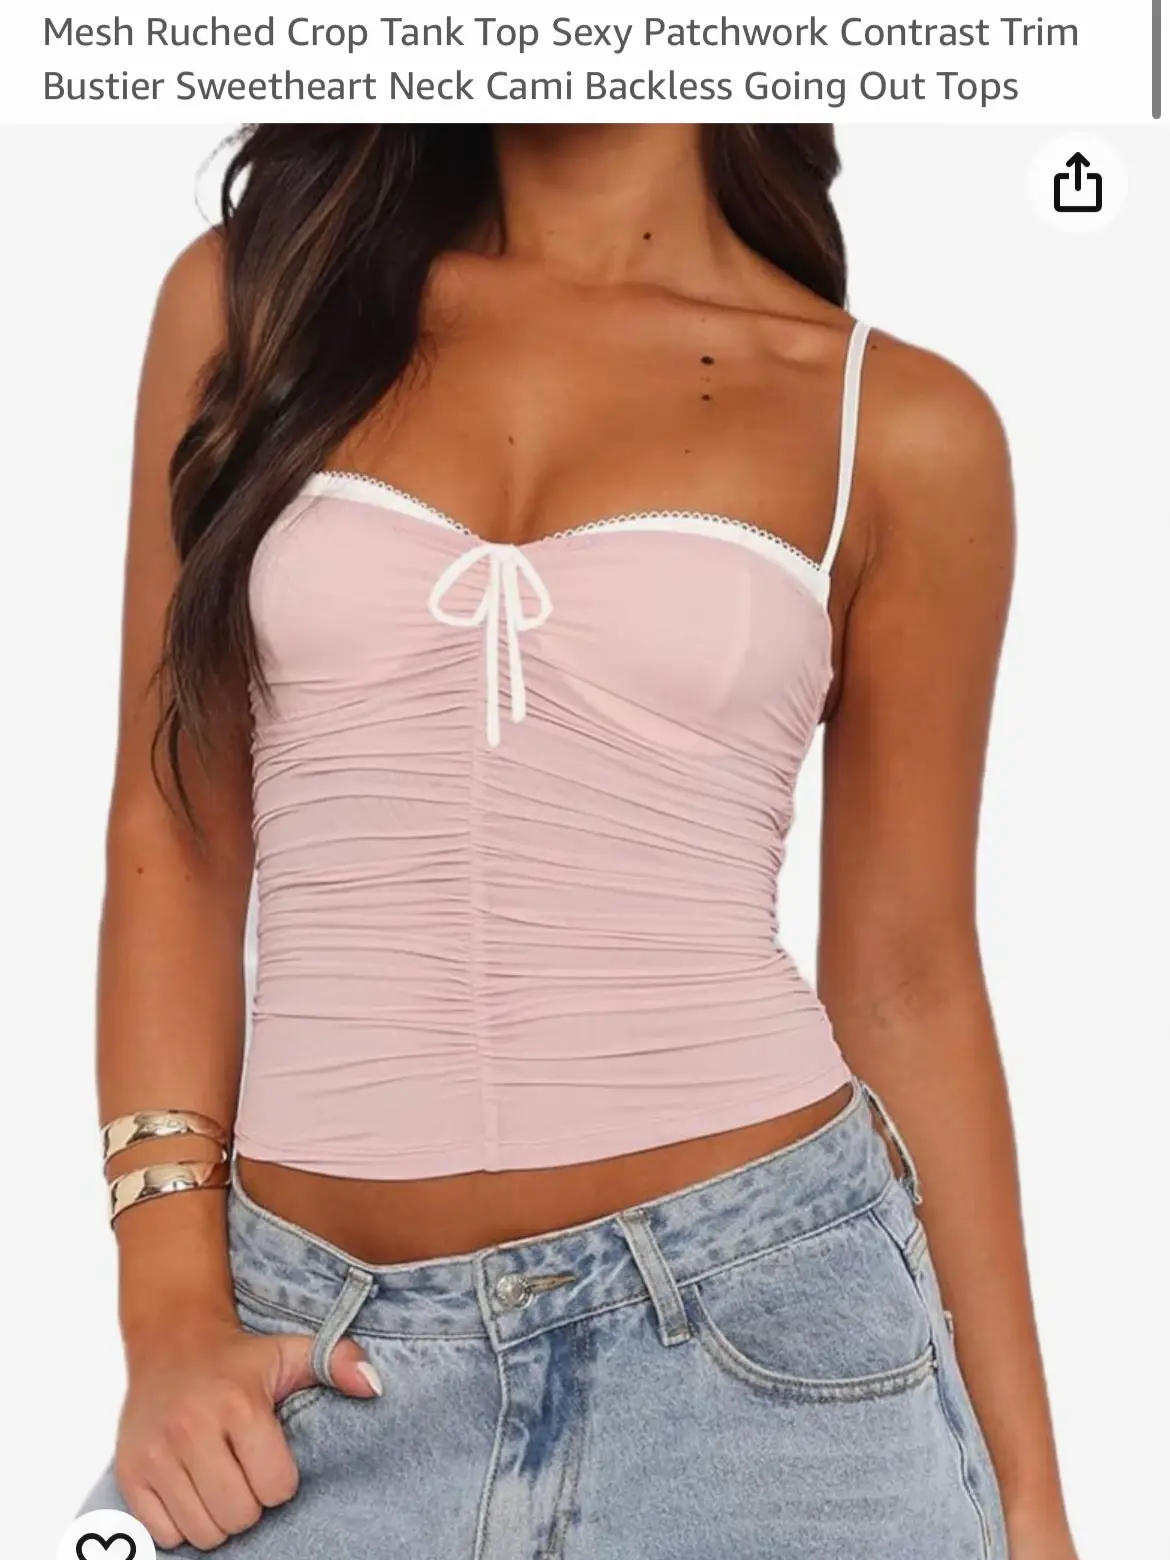 This “Beautiful and Comfortable” $30 Mesh Bustier Is Going Viral on TikTok